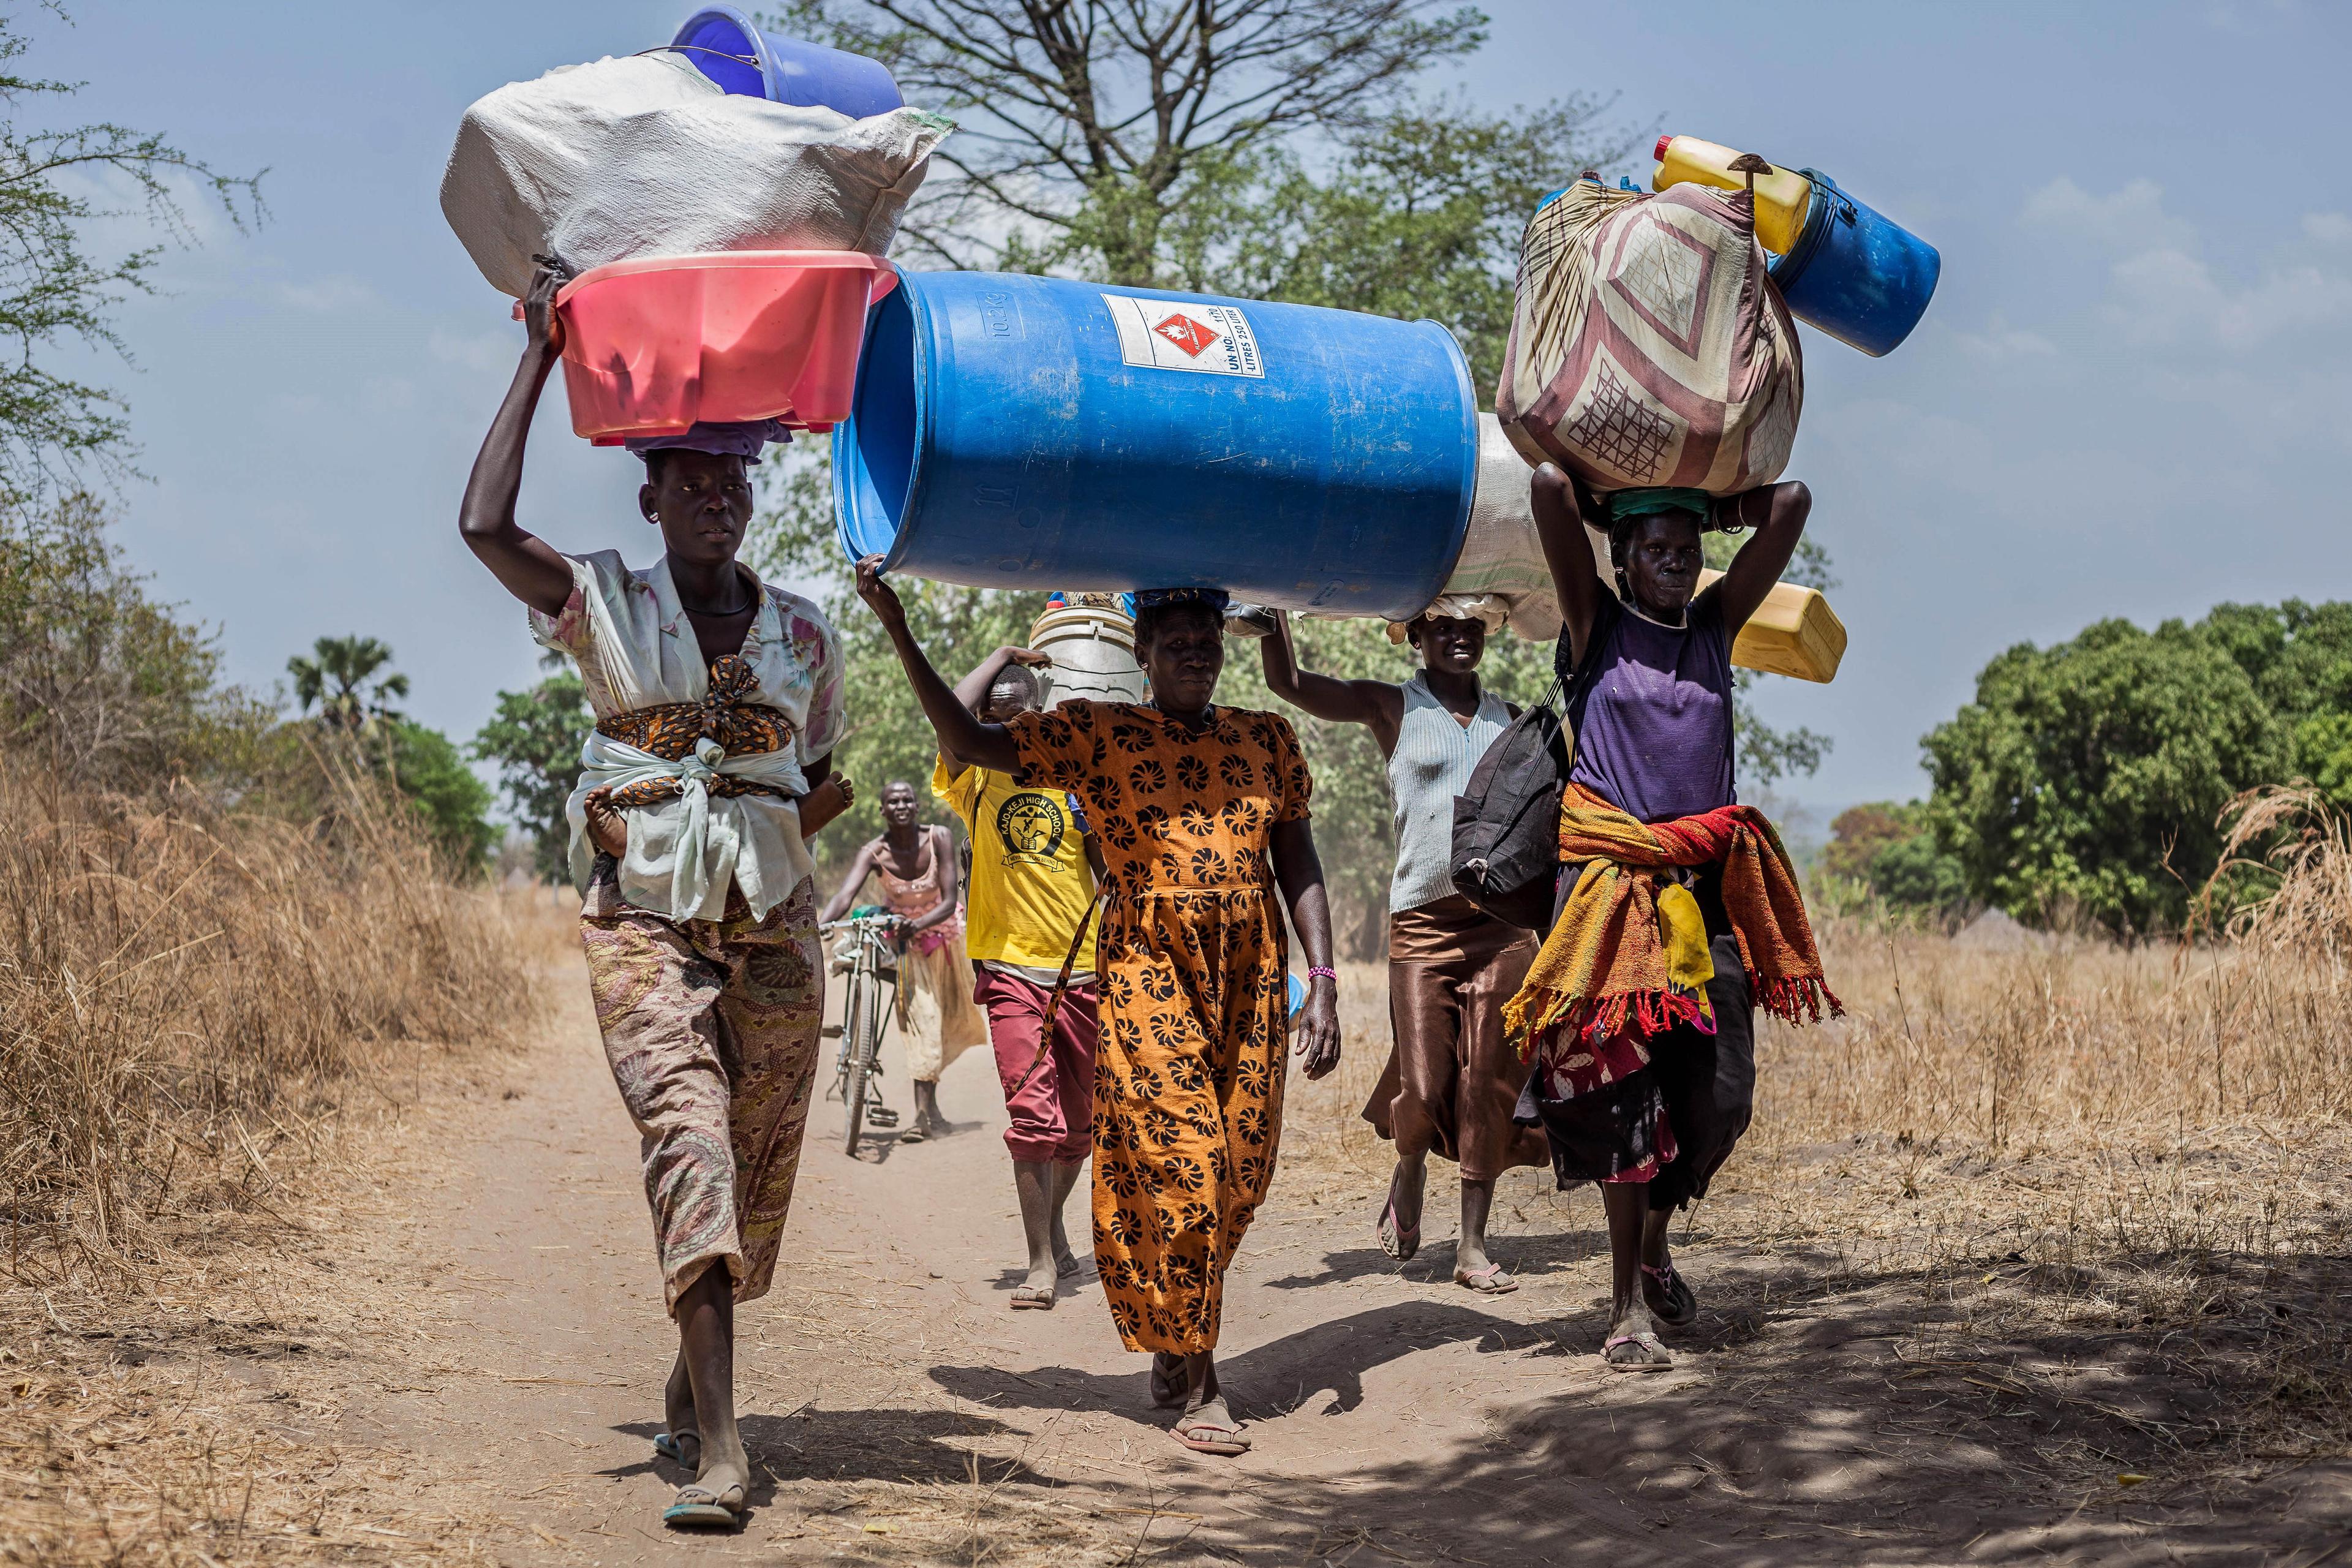 African people carrying water containers on their heads